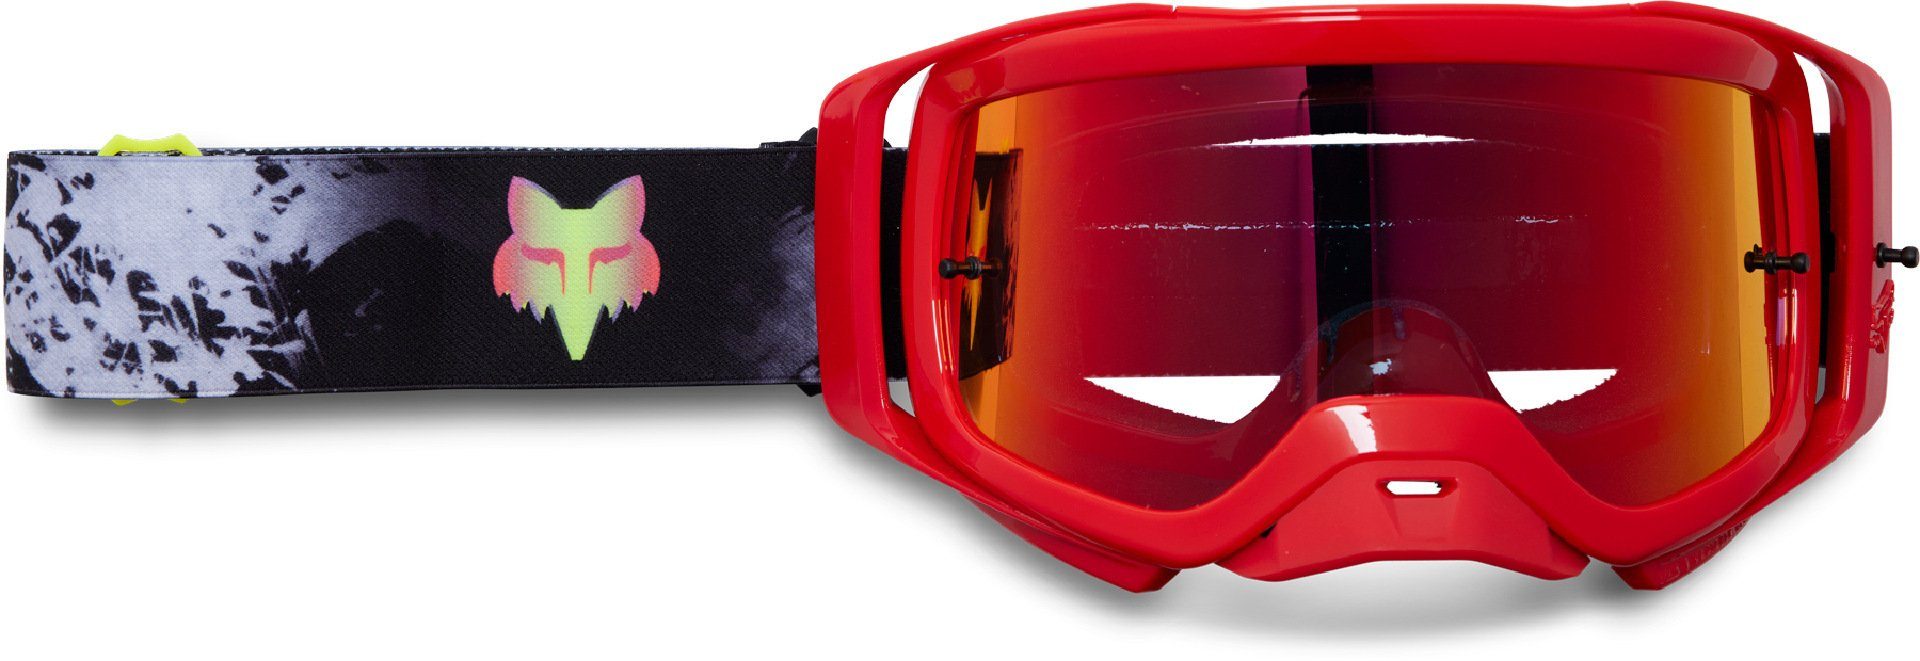 Brille Fox Mirrored Sonnenbrille Dkay Airspace Motocross